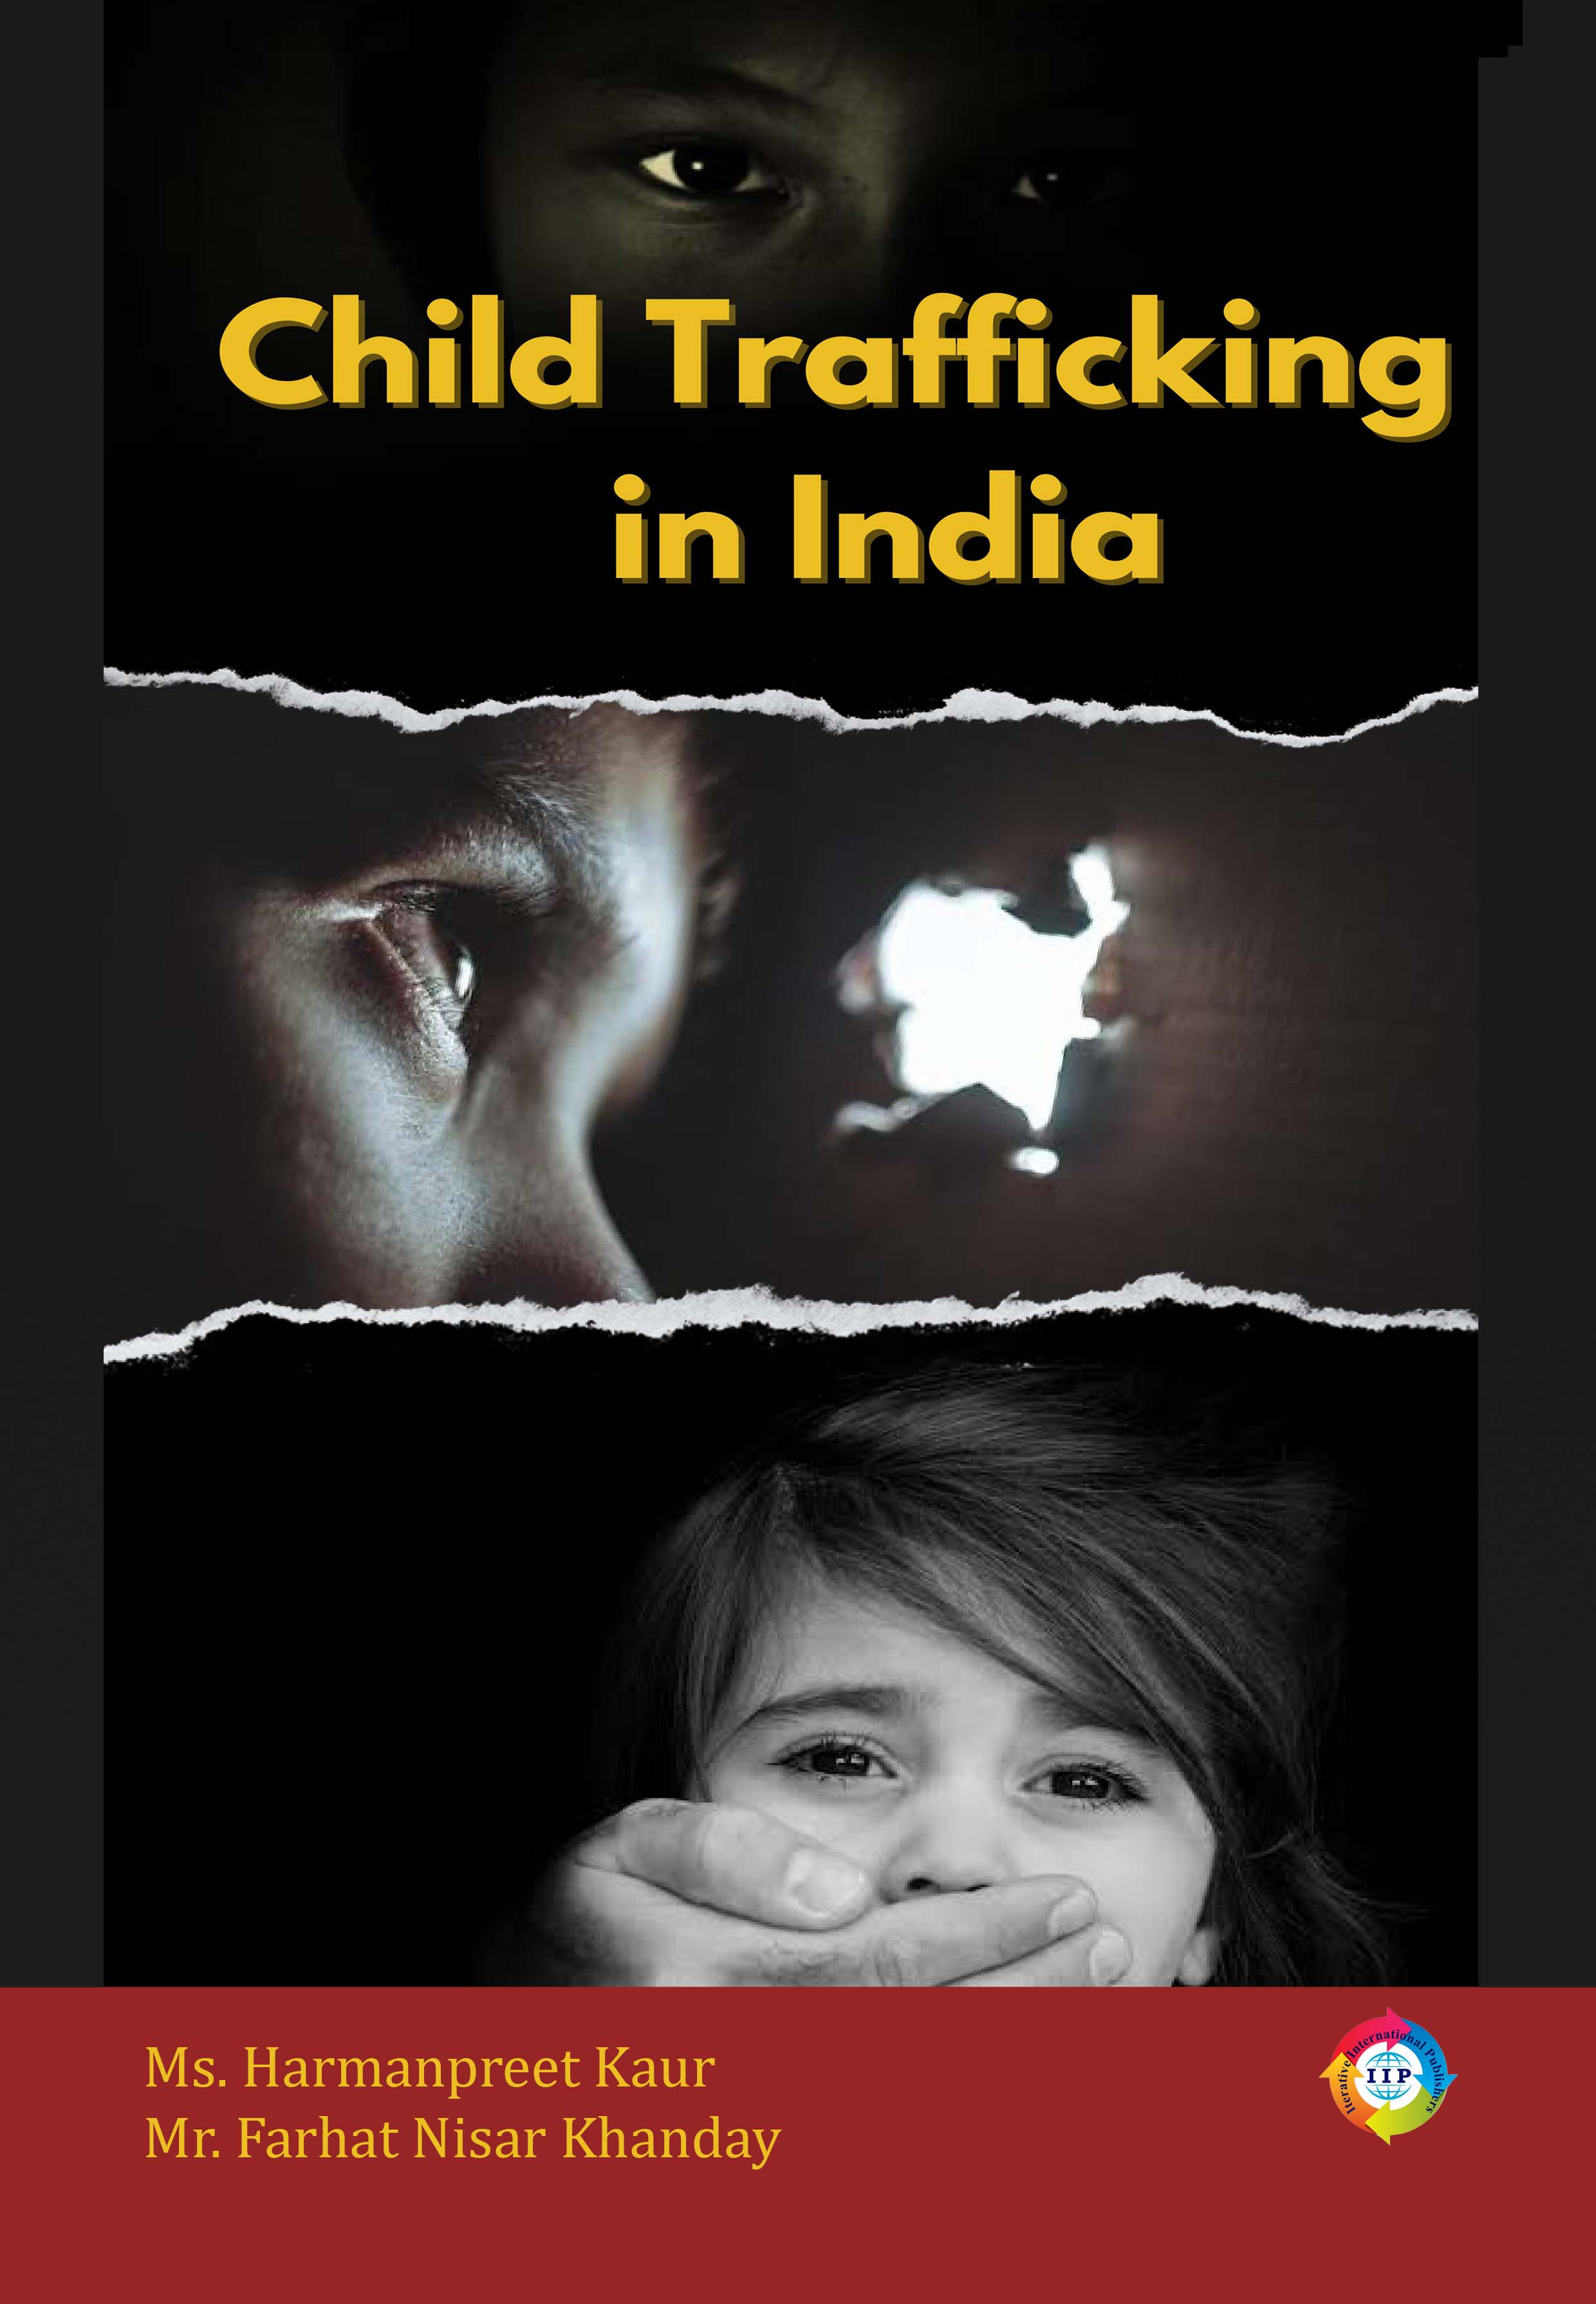 CHILD TRAFFICKING IN INDIA